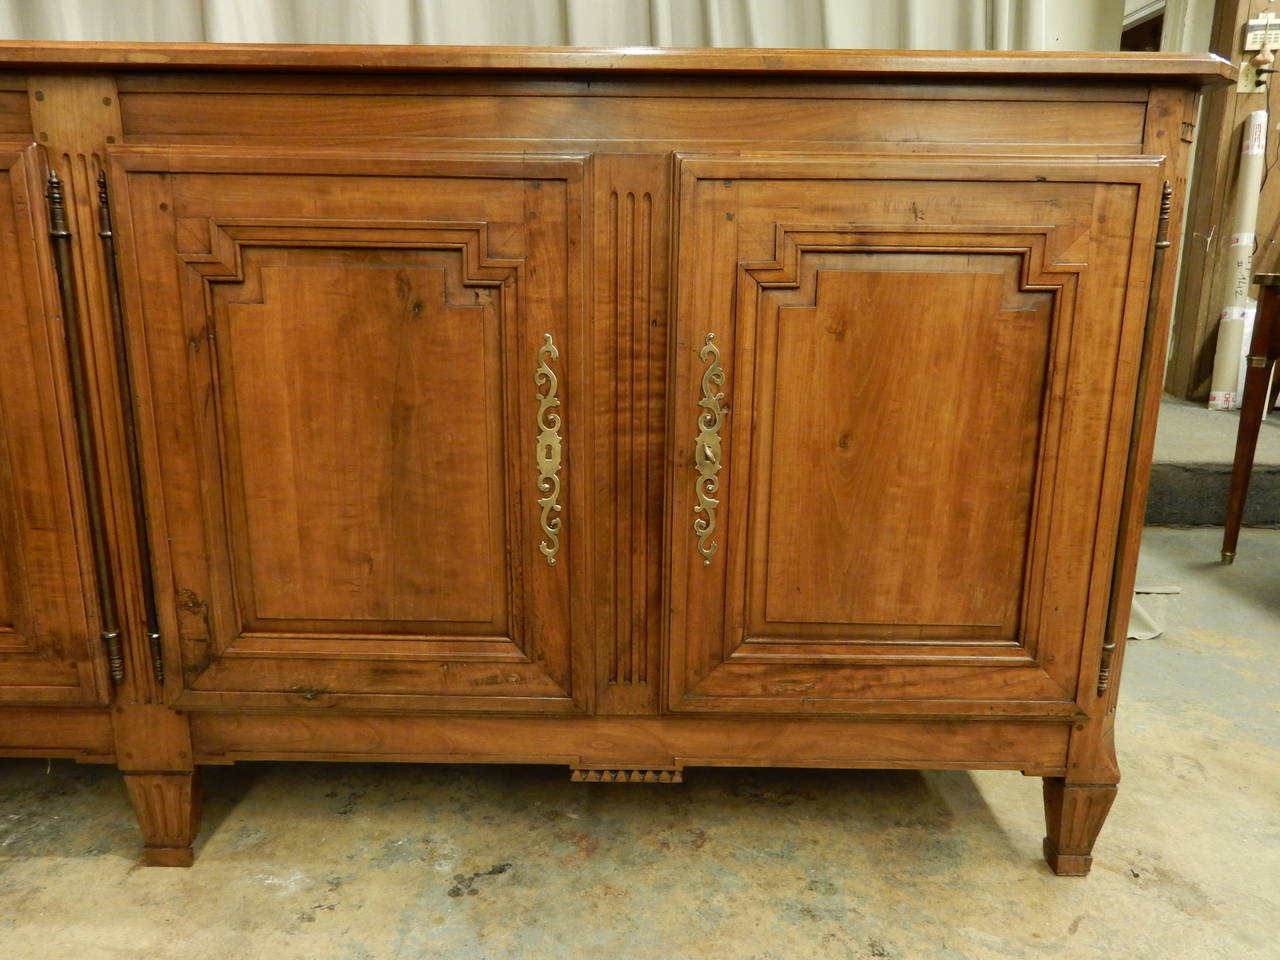 Beautifully restored French Directoire walnut four-door enfilade. Very nice warm patina.